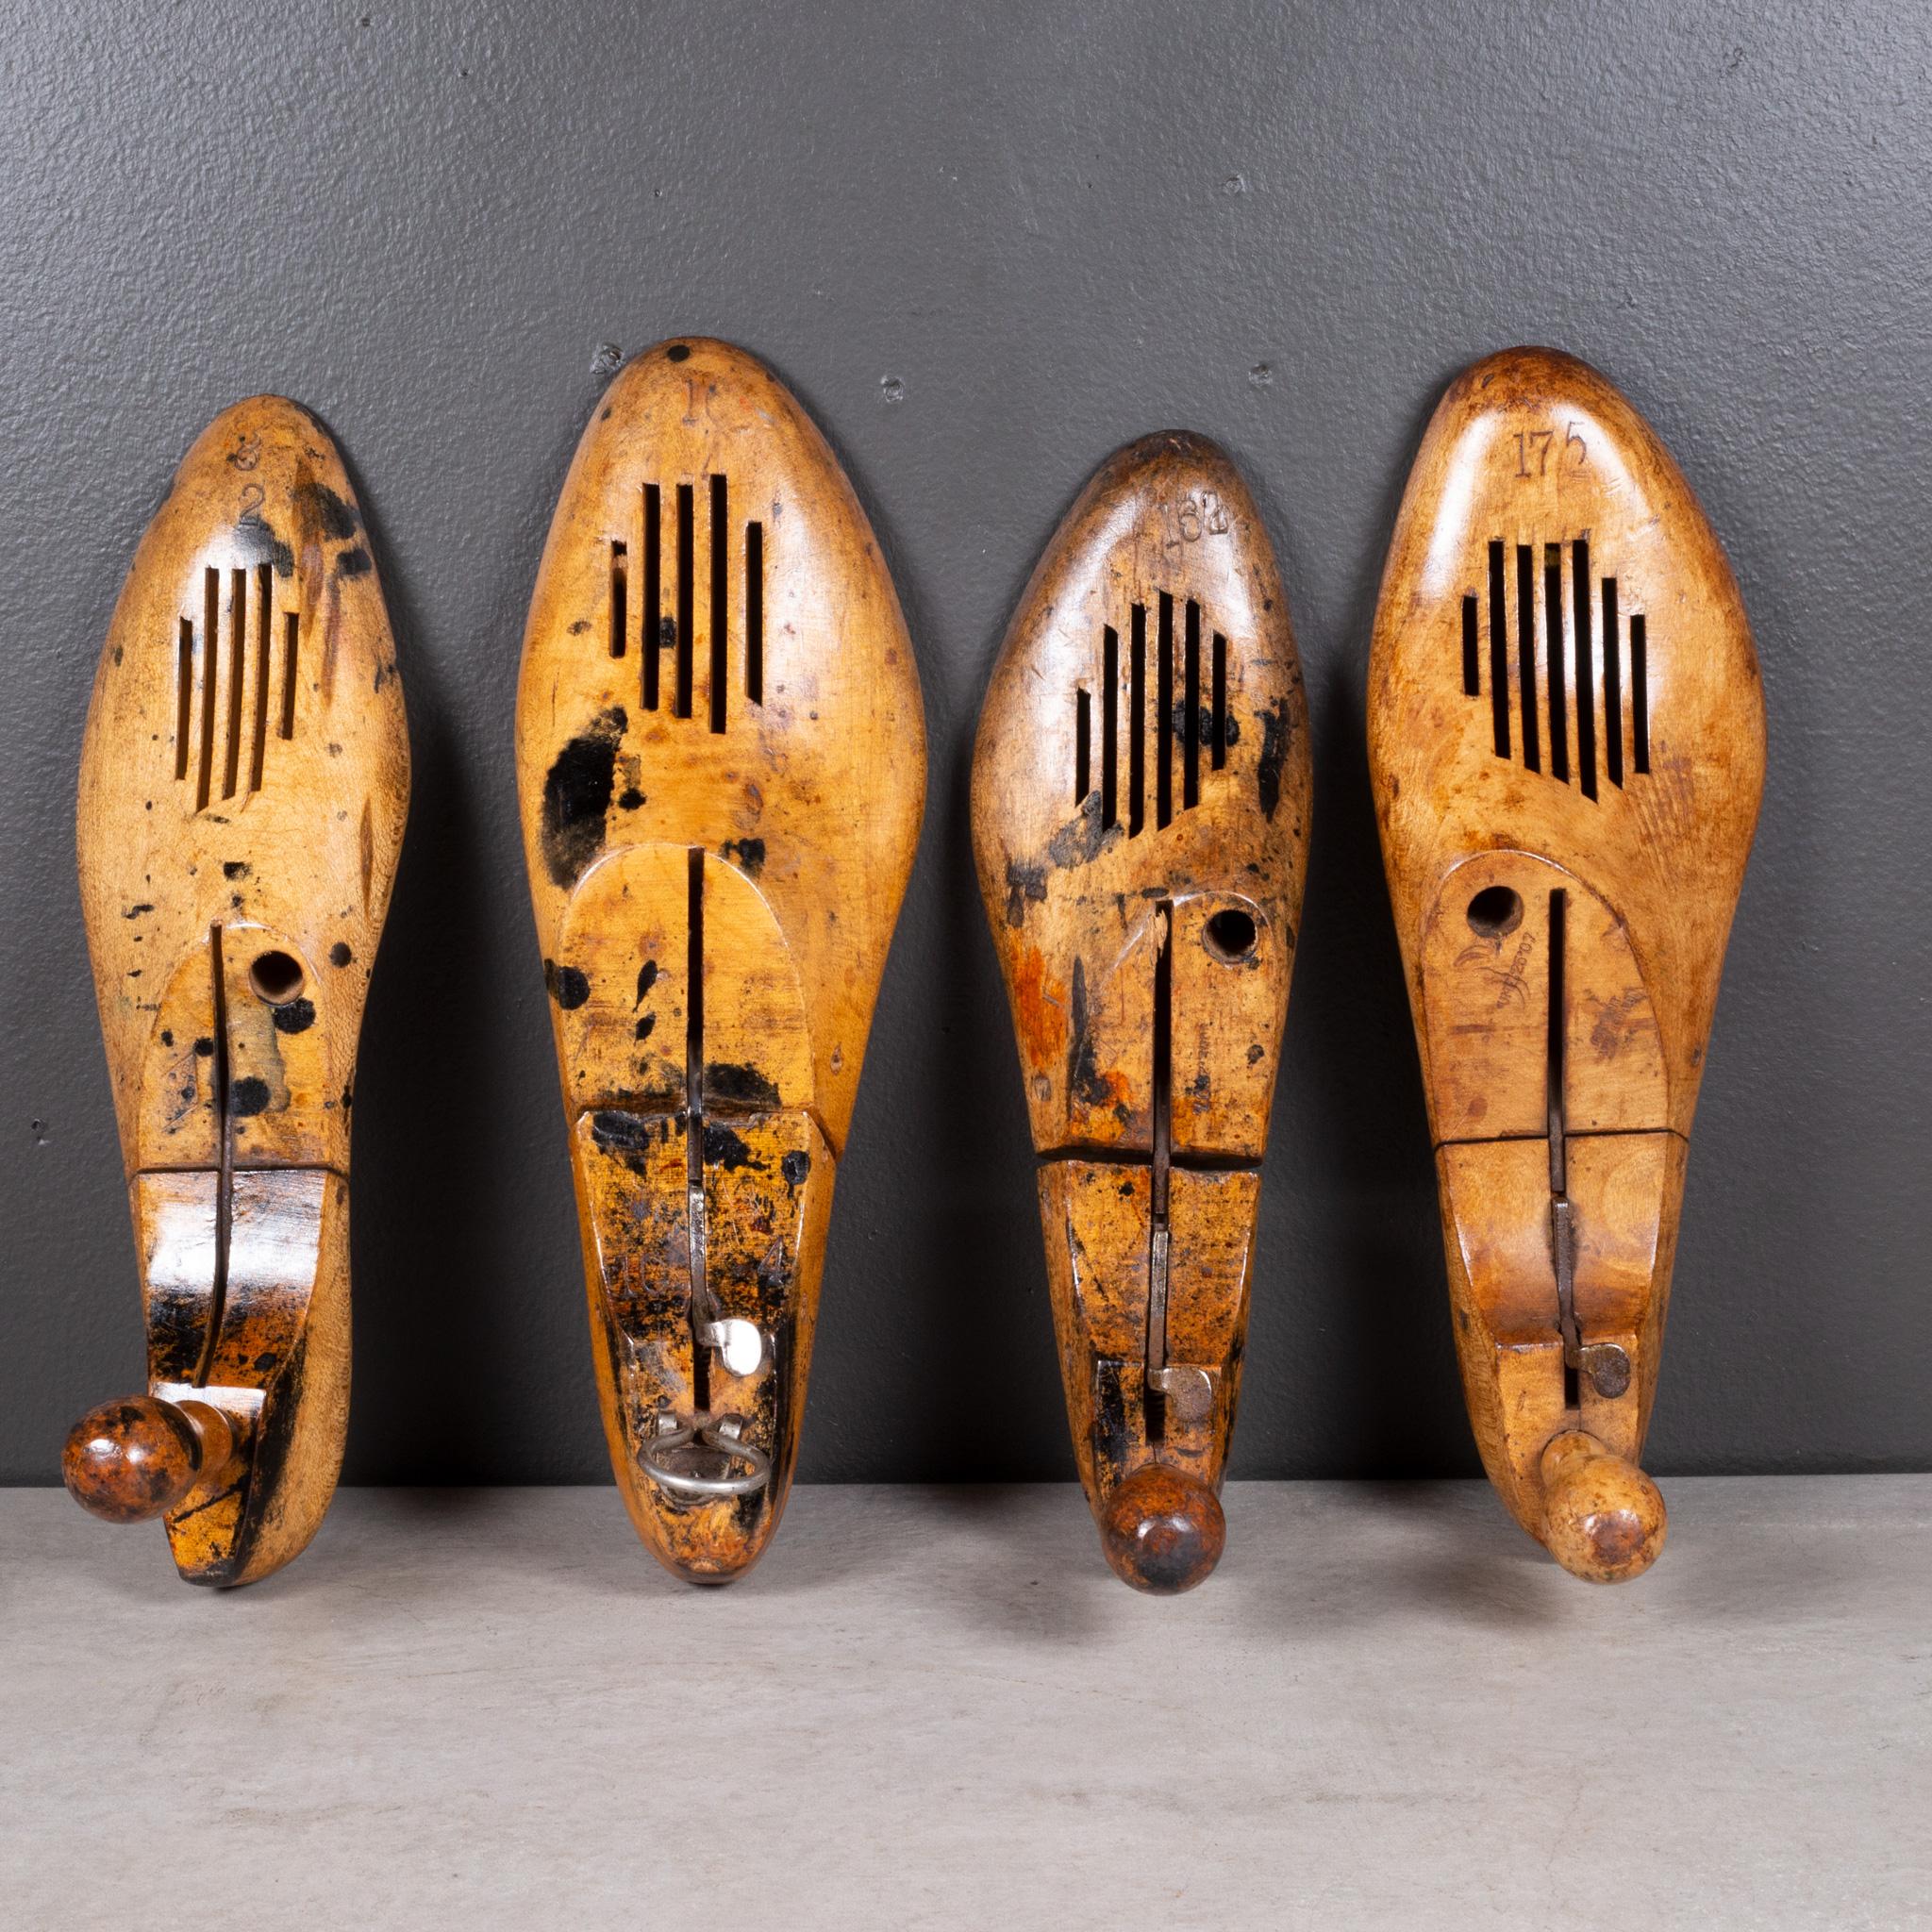 ﻿ABOUT

Price is per collection. 6 collections available. Please specify which set to purchase. Decorative only.

Original cobbler's wooden shoe forms. Sold in sets of four. They have retained their original finish and have the appropriate wear.

  